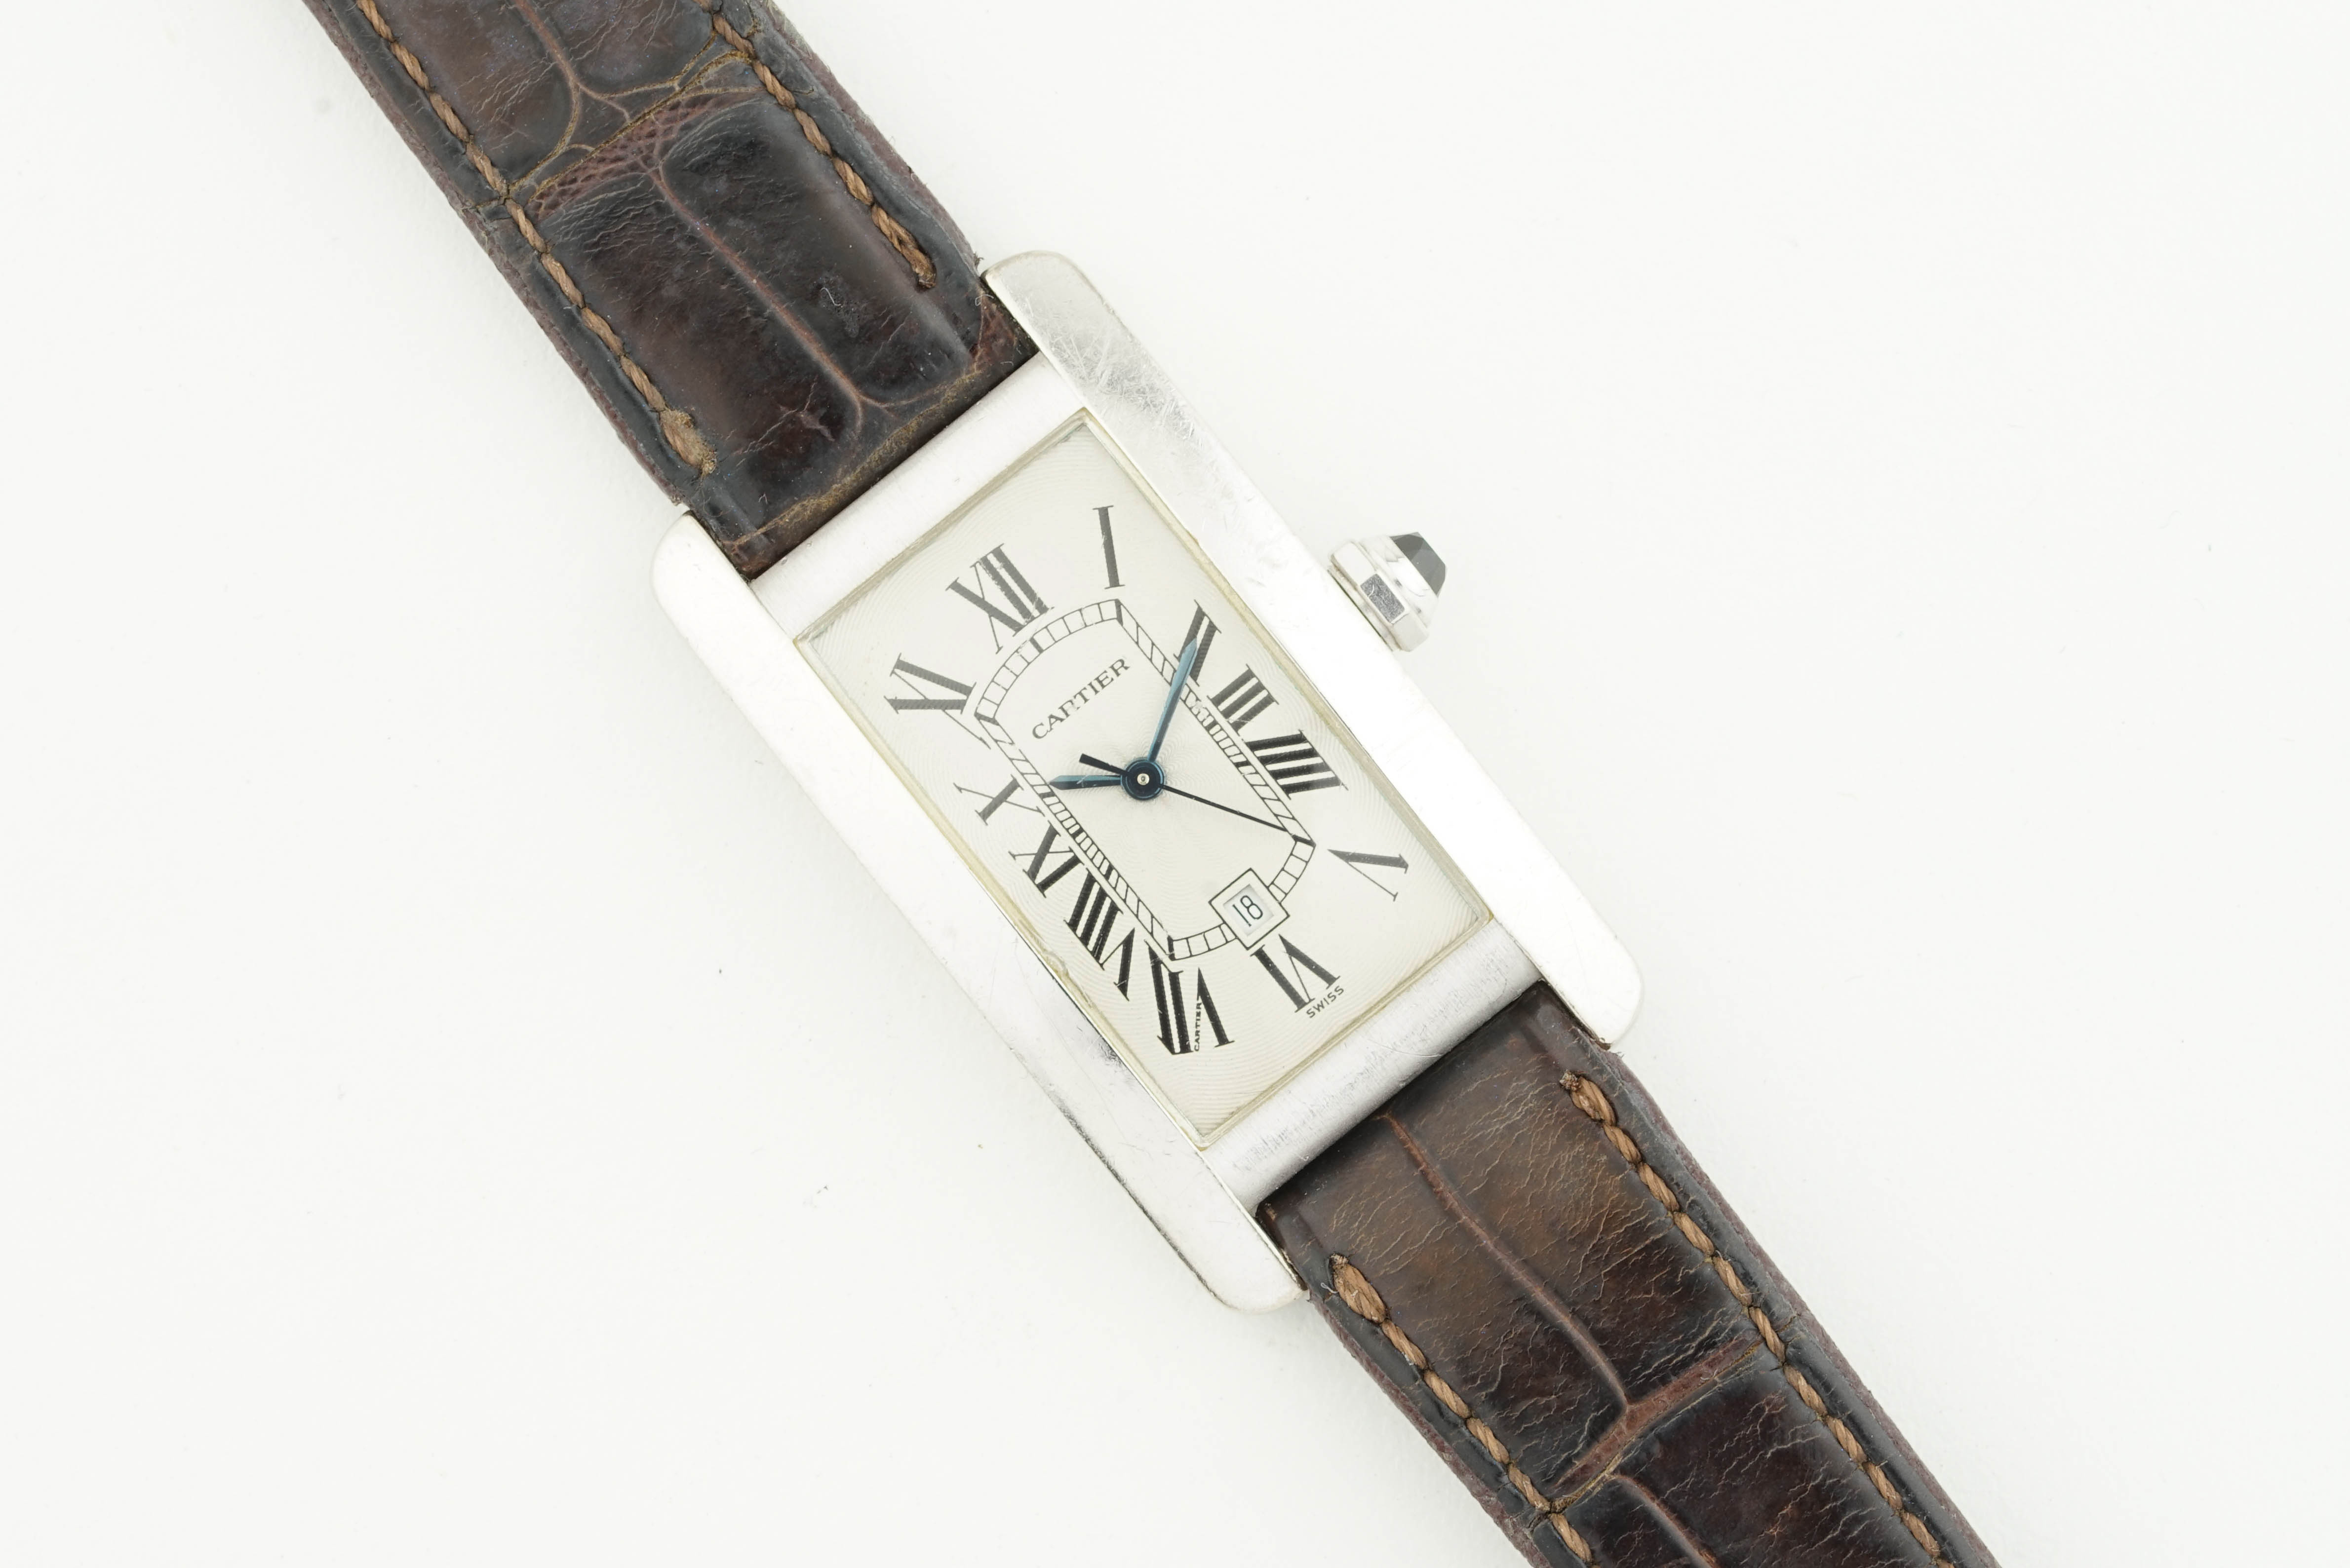 CARTIER TANK AMERICAINE 18CT WHITE GOLD W/ GUARANTEE PAPERS REF. 1726 - Image 2 of 5